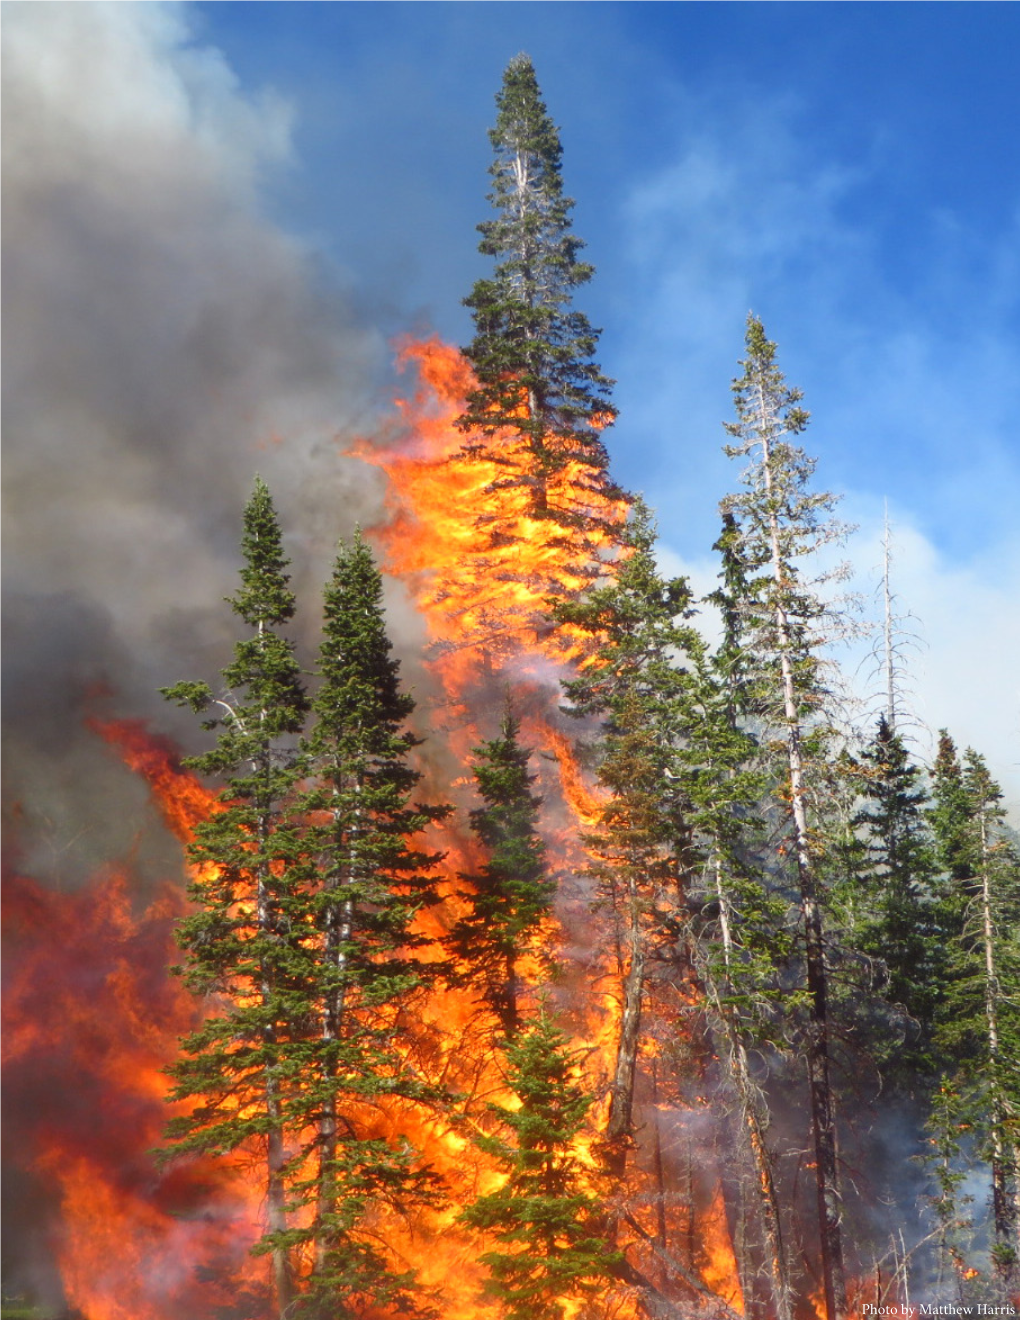 Photo by Matthew Harris a Quantitative Approach to Living Sustainably with Wildfire by Alex Harros and Matt Valido, 2017-18 State of the Rockies Project Fellows